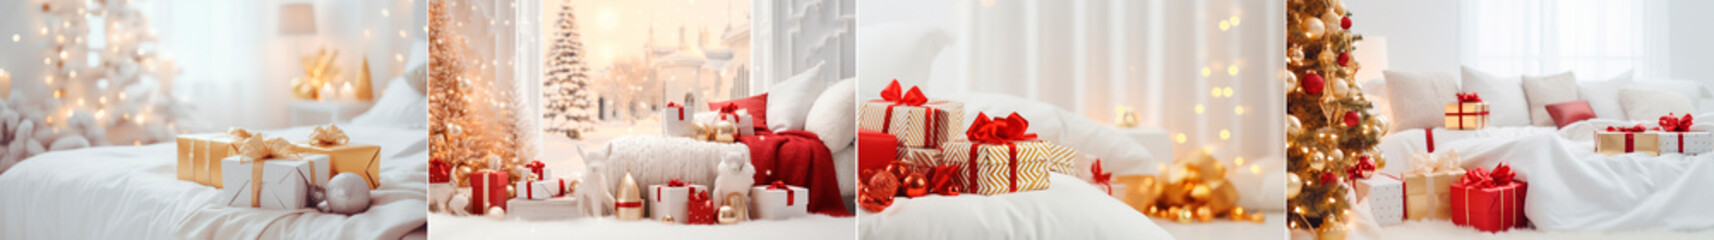 Create a festive Christmas atmosphere in your bedroom with a red, gold and white themed tree....